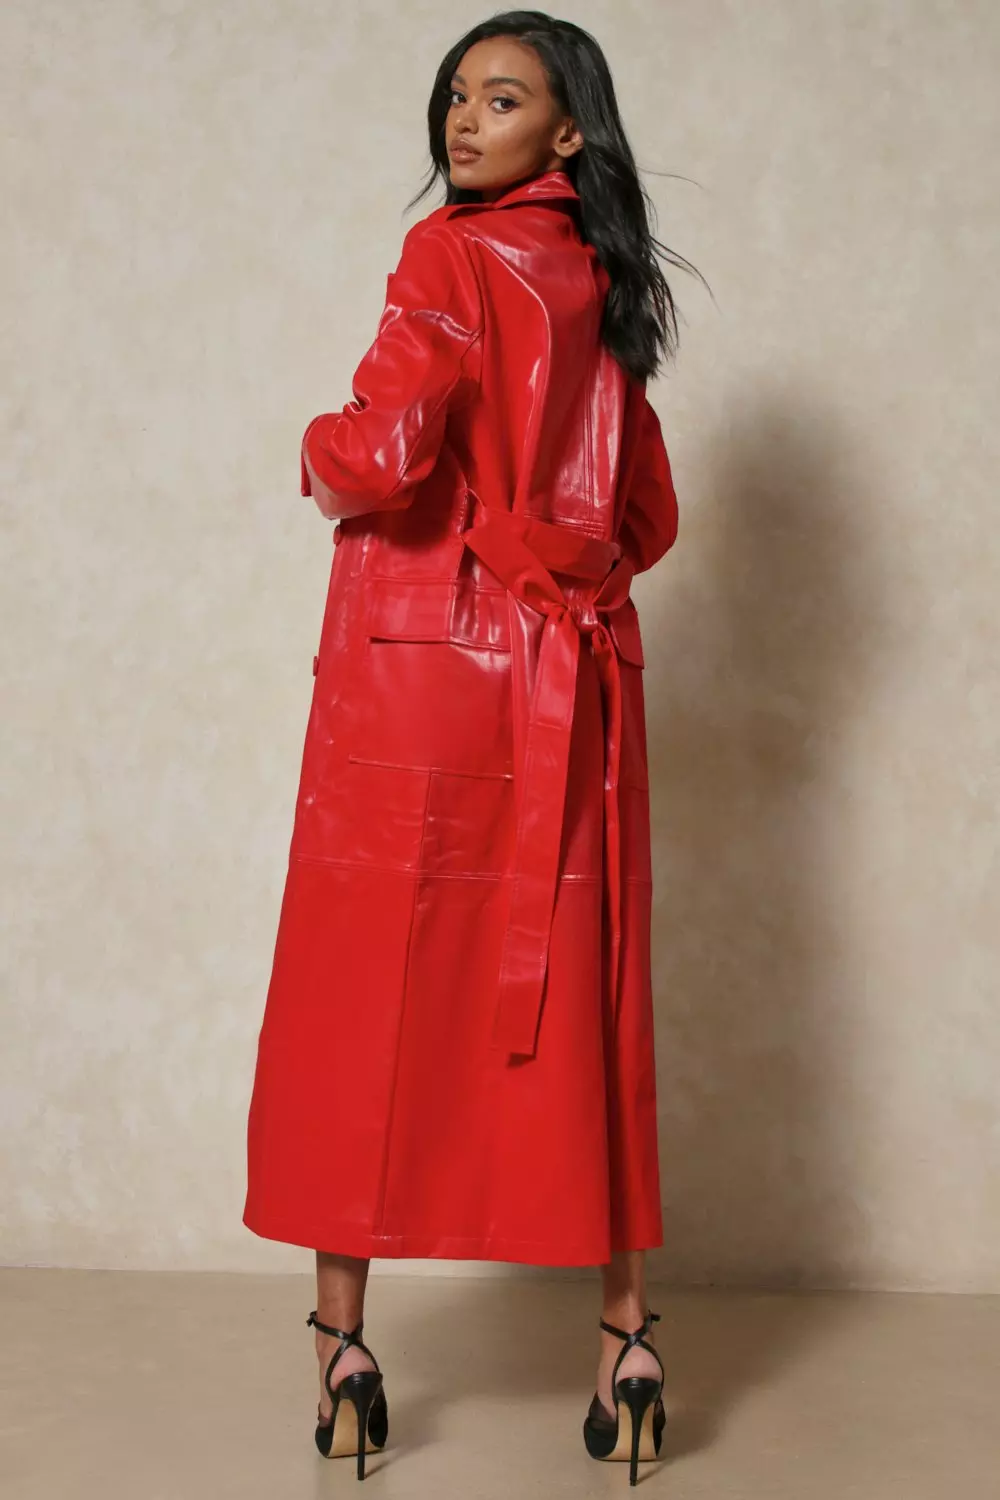 Sparkly Stripes and Bright Red Trench Coat + link up - Style Splash